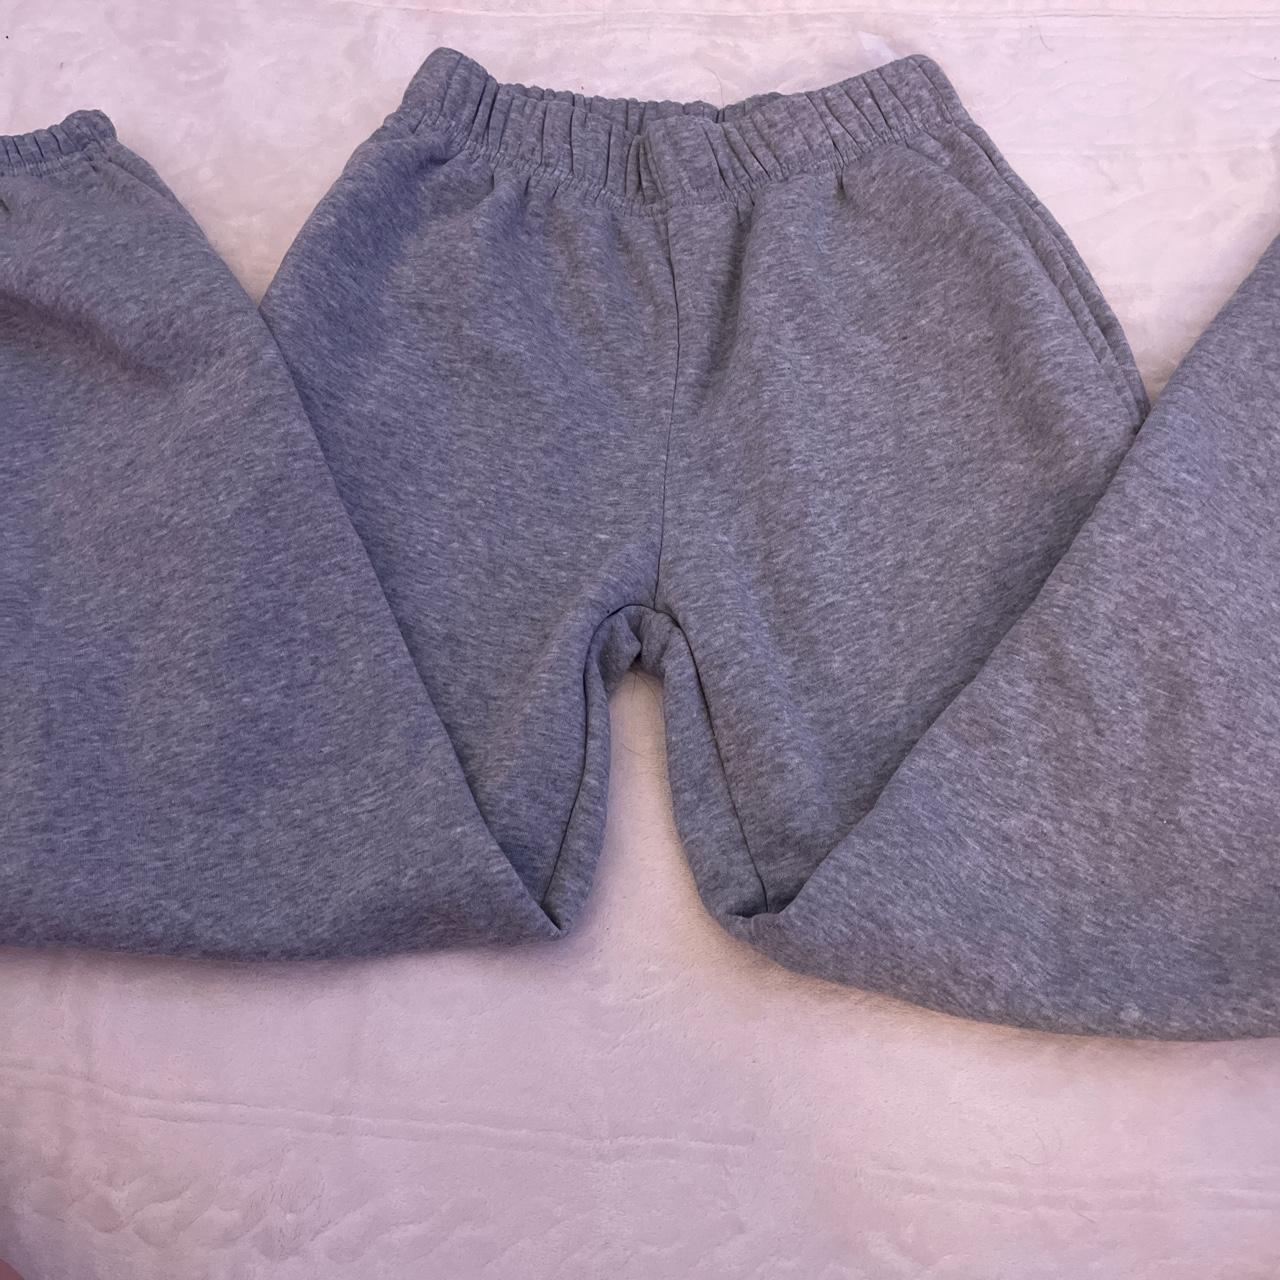 Super soft gray sweatpants they look just like the... - Depop